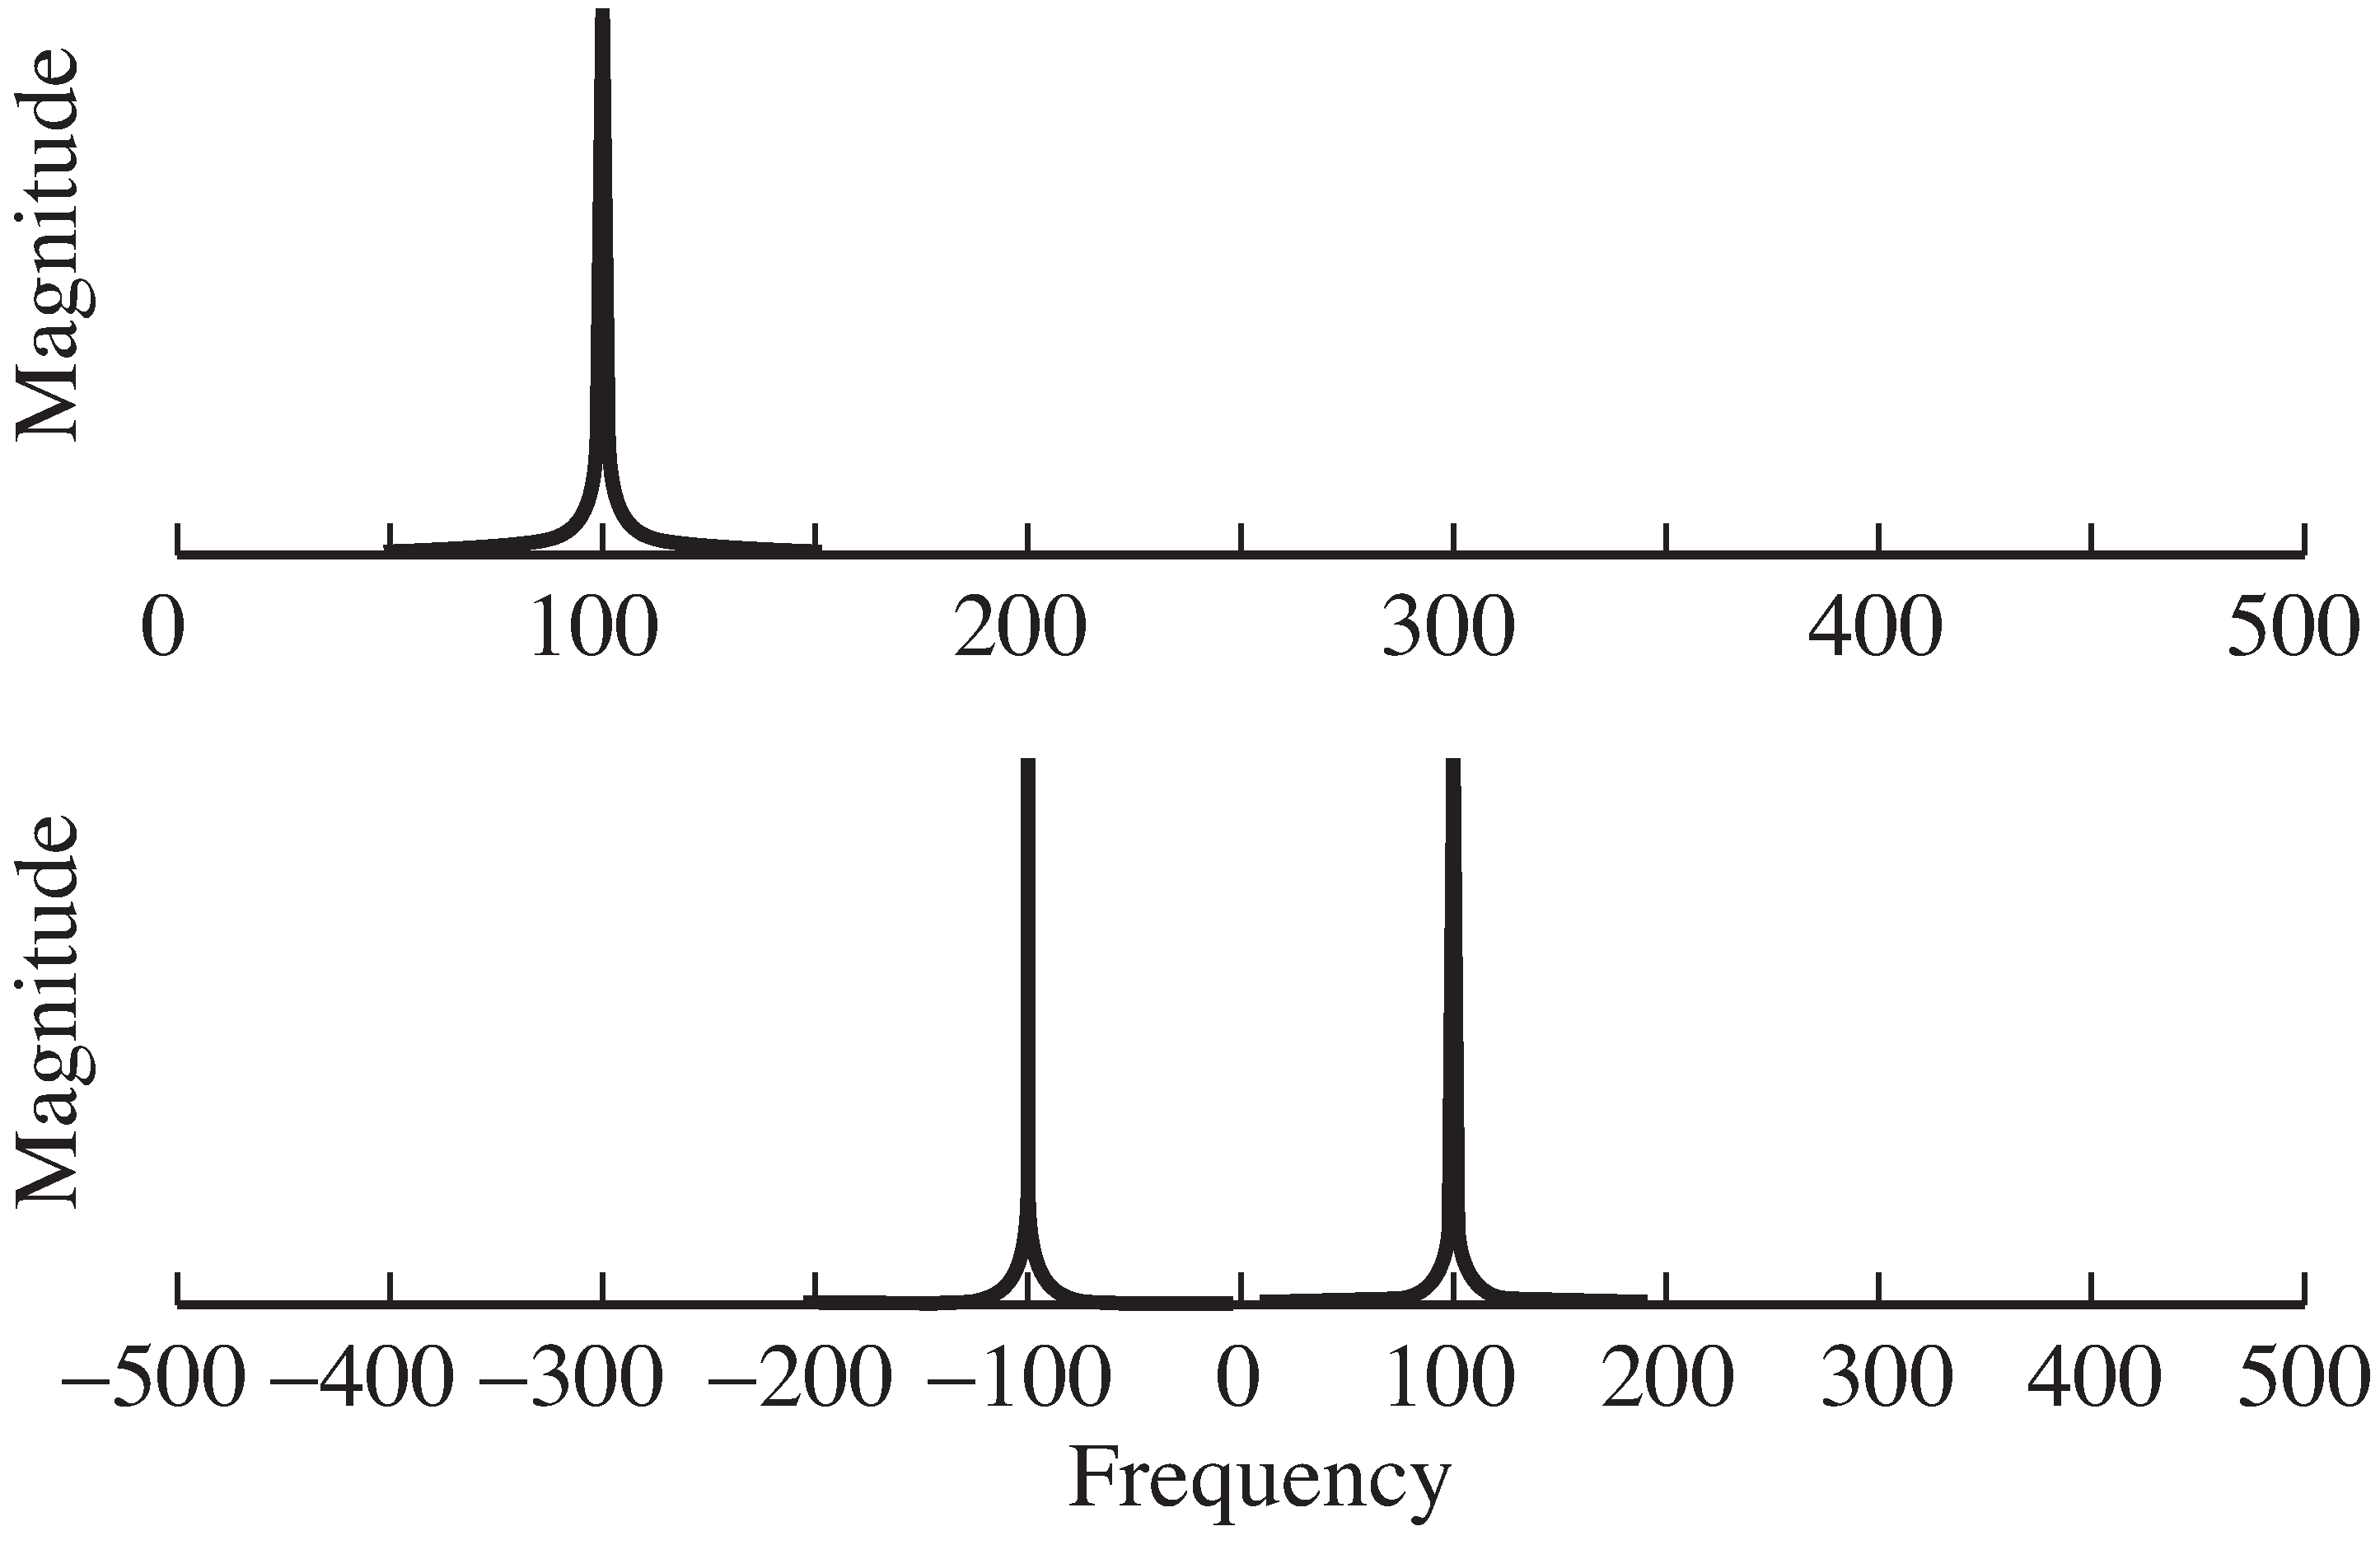 Proper use of the FFT  command can be done as in specsin1.m  (the top graph), which plots only the positive frequencies, or as in specsin2.m  (the bottom graph), which shows the full magnitude spectrum symmetric about f=0.